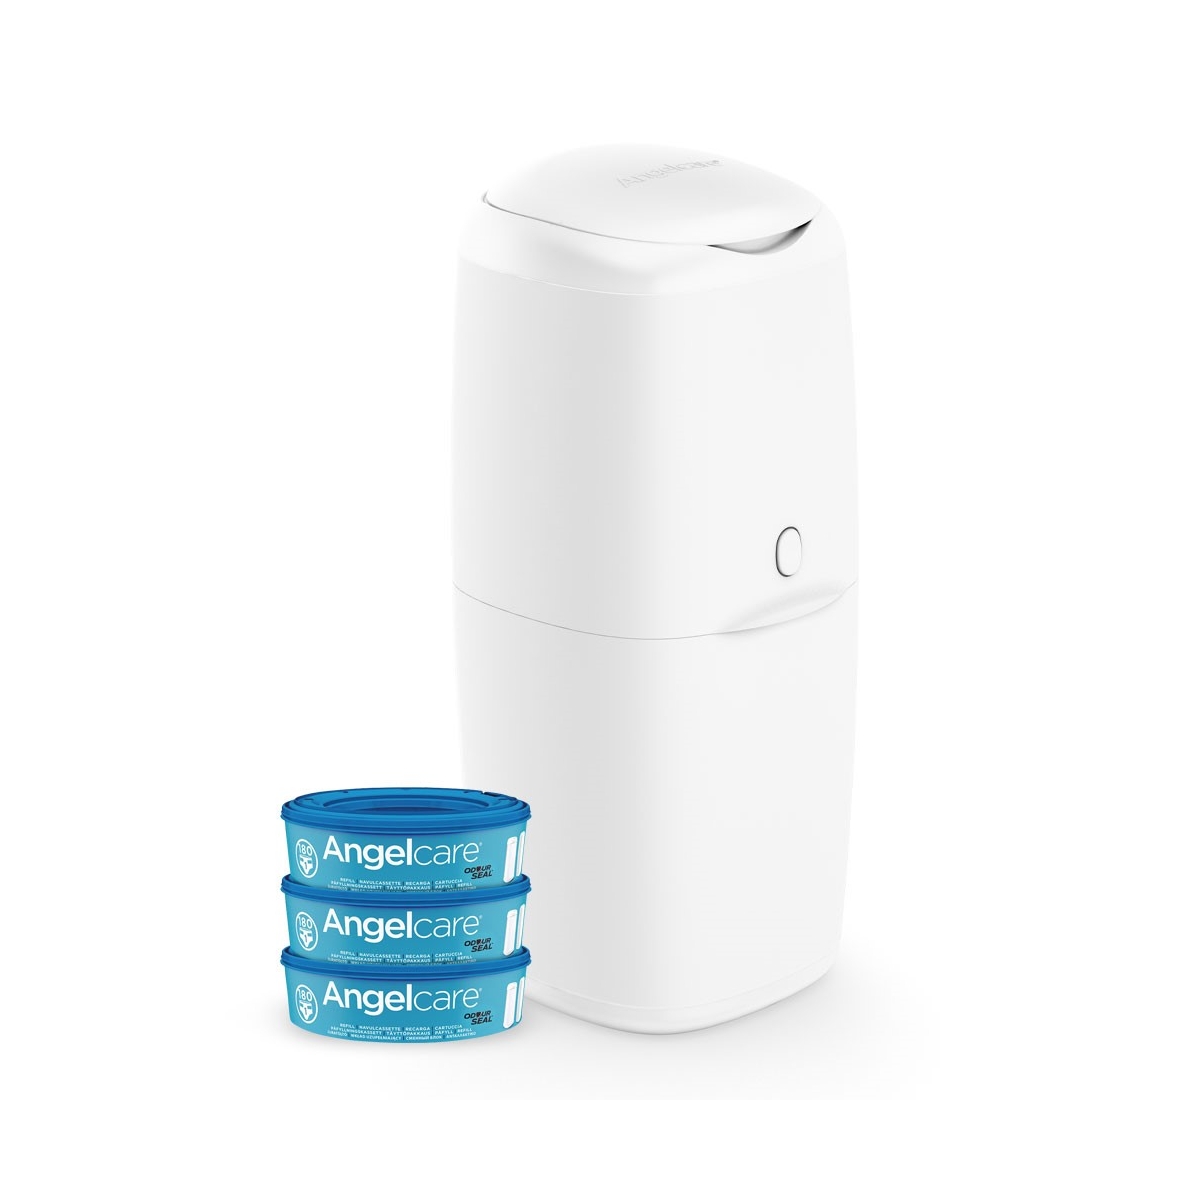 Angelcare Nappy Disposal System With 3 Pack Refill Cassettes-White 